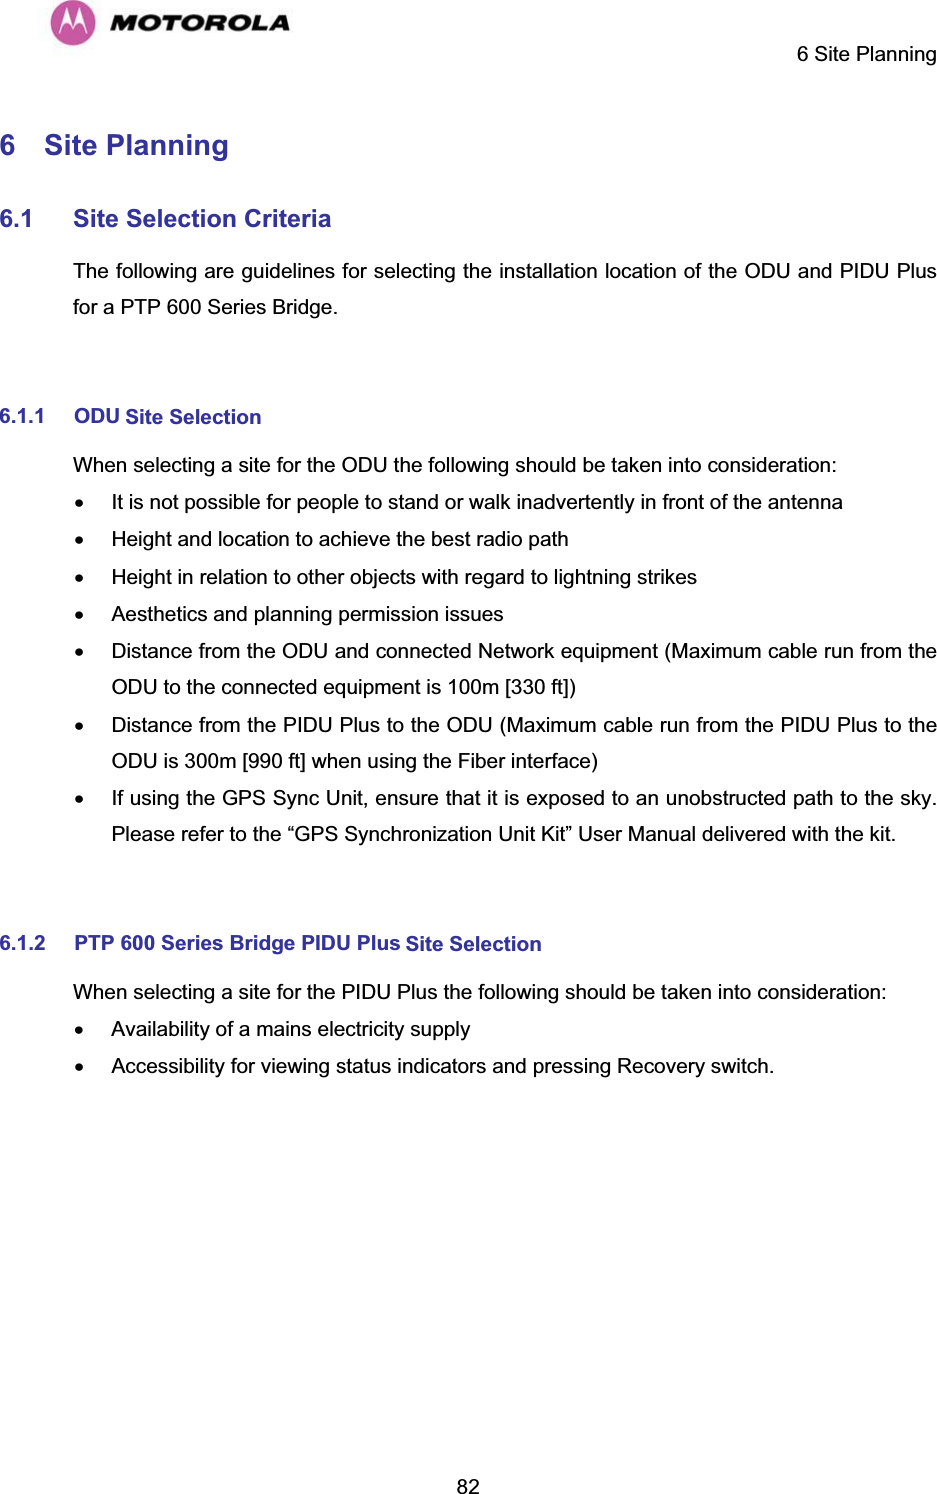     6 Site Planning  826  Site Planning  6.1 Site Selection CriteriaThe following are guidelines for selecting the installation location of the ODU and PIDU Plus for a PTP 600 Series Bridge.   6.1.1 ODU Site Selection  When selecting a site for the ODU the following should be taken into consideration:  x  It is not possible for people to stand or walk inadvertently in front of the antenna  x  Height and location to achieve the best radio path  x  Height in relation to other objects with regard to lightning strikes  x  Aesthetics and planning permission issues  x  Distance from the ODU and connected Network equipment (Maximum cable run from the ODU to the connected equipment is 100m [330 ft])  x  Distance from the PIDU Plus to the ODU (Maximum cable run from the PIDU Plus to the ODU is 300m [990 ft] when using the Fiber interface)  x  If using the GPS Sync Unit, ensure that it is exposed to an unobstructed path to the sky. Please refer to the “GPS Synchronization Unit Kit” User Manual delivered with the kit.  6.1.2 PTP 600 Series Bridge PIDU Plus Site SelectionWhen selecting a site for the PIDU Plus the following should be taken into consideration:  x  Availability of a mains electricity supply  x  Accessibility for viewing status indicators and pressing Recovery switch.  